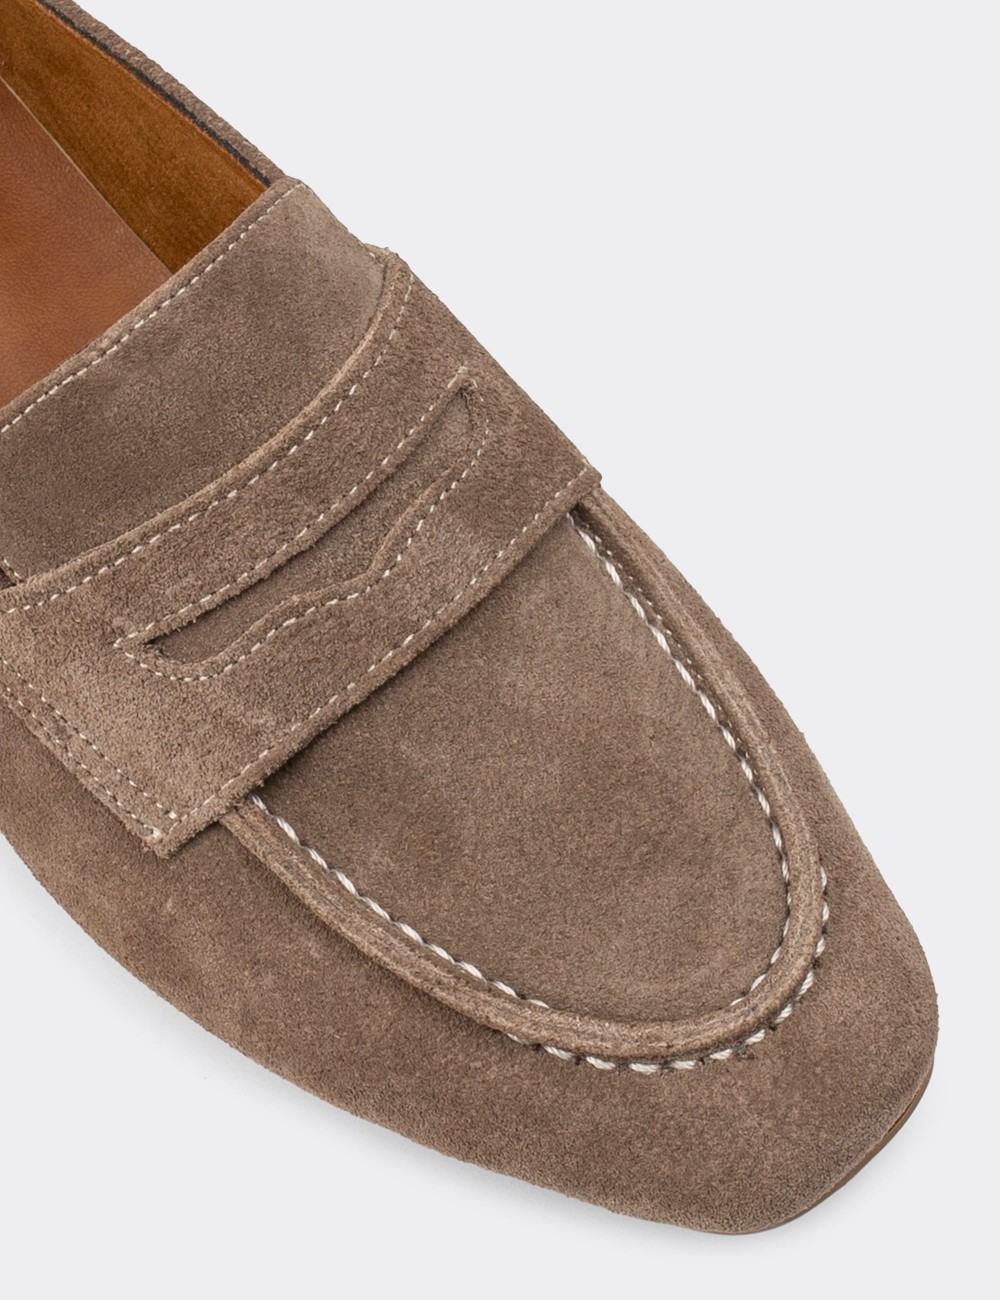 Sandstone Suede Leather Loafers - 01914ZVZNC01